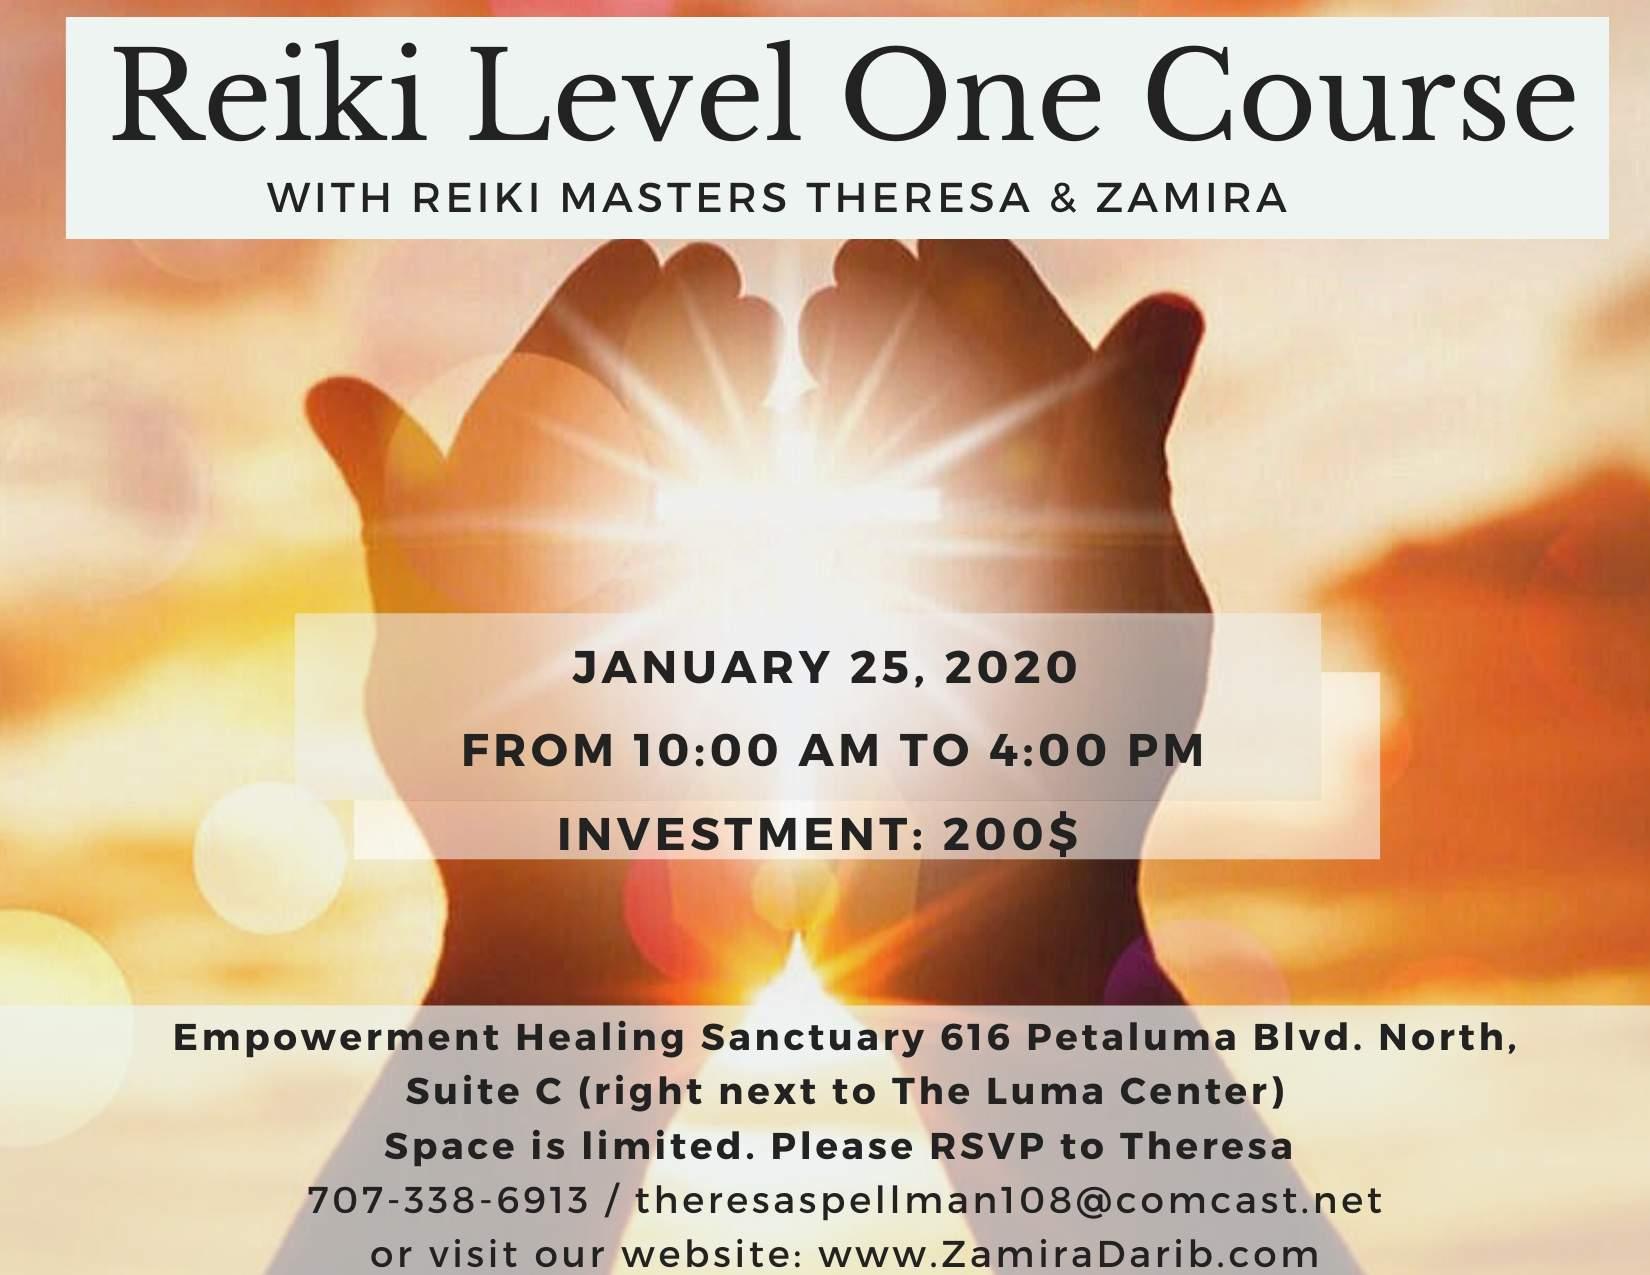 Reiki Level One Course - Learn to Heal Yourself